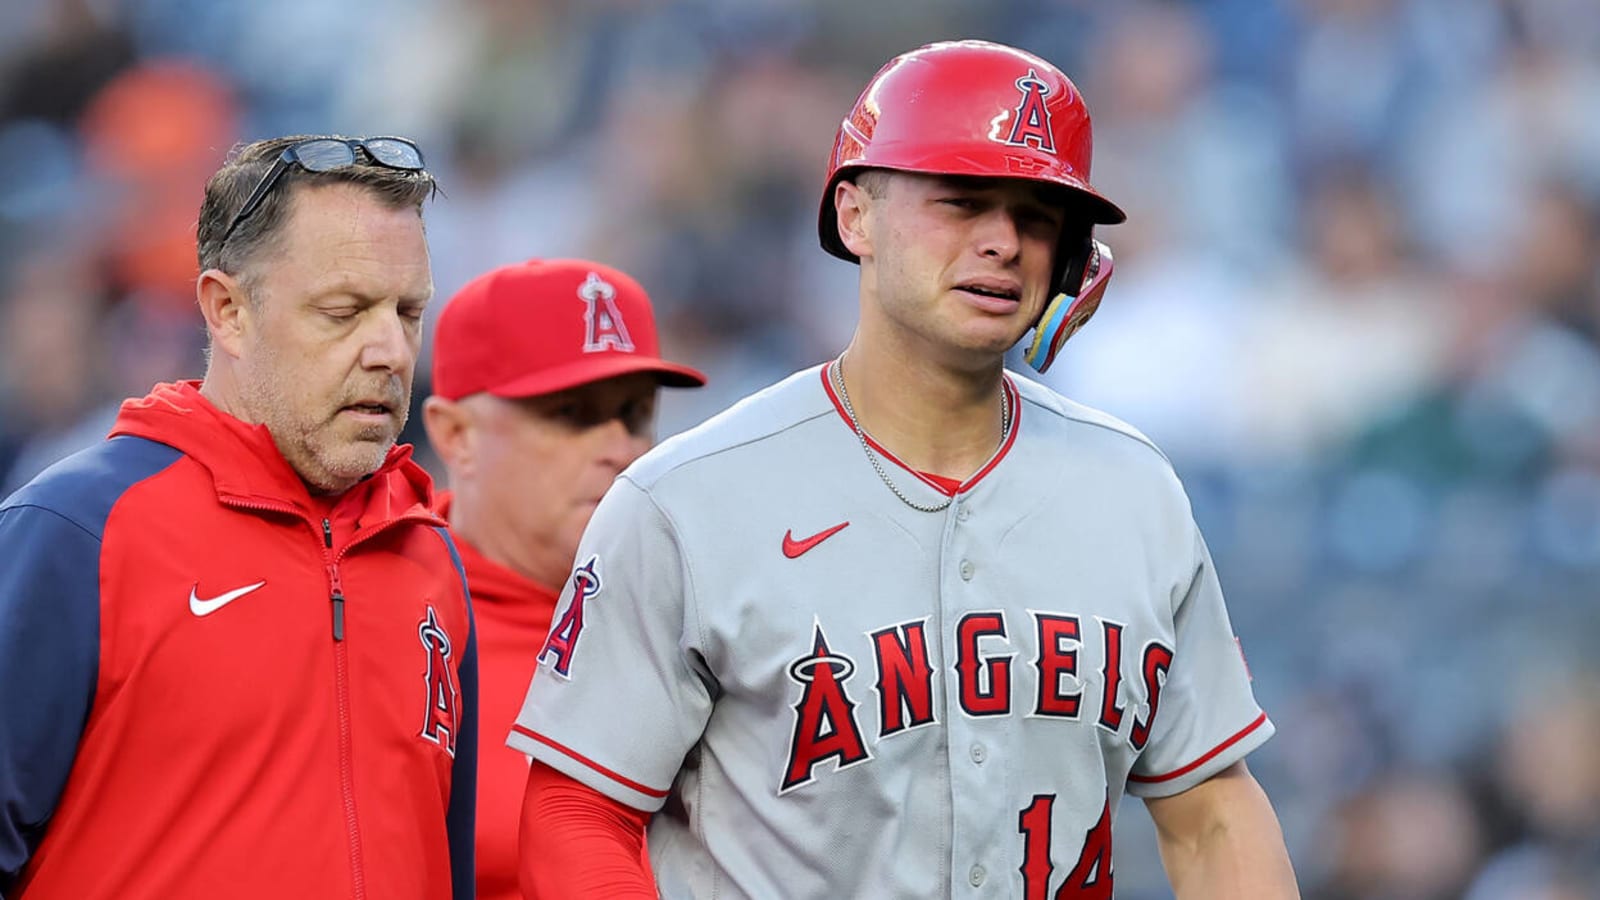 Angels promising rookie exits game with shoulder injury